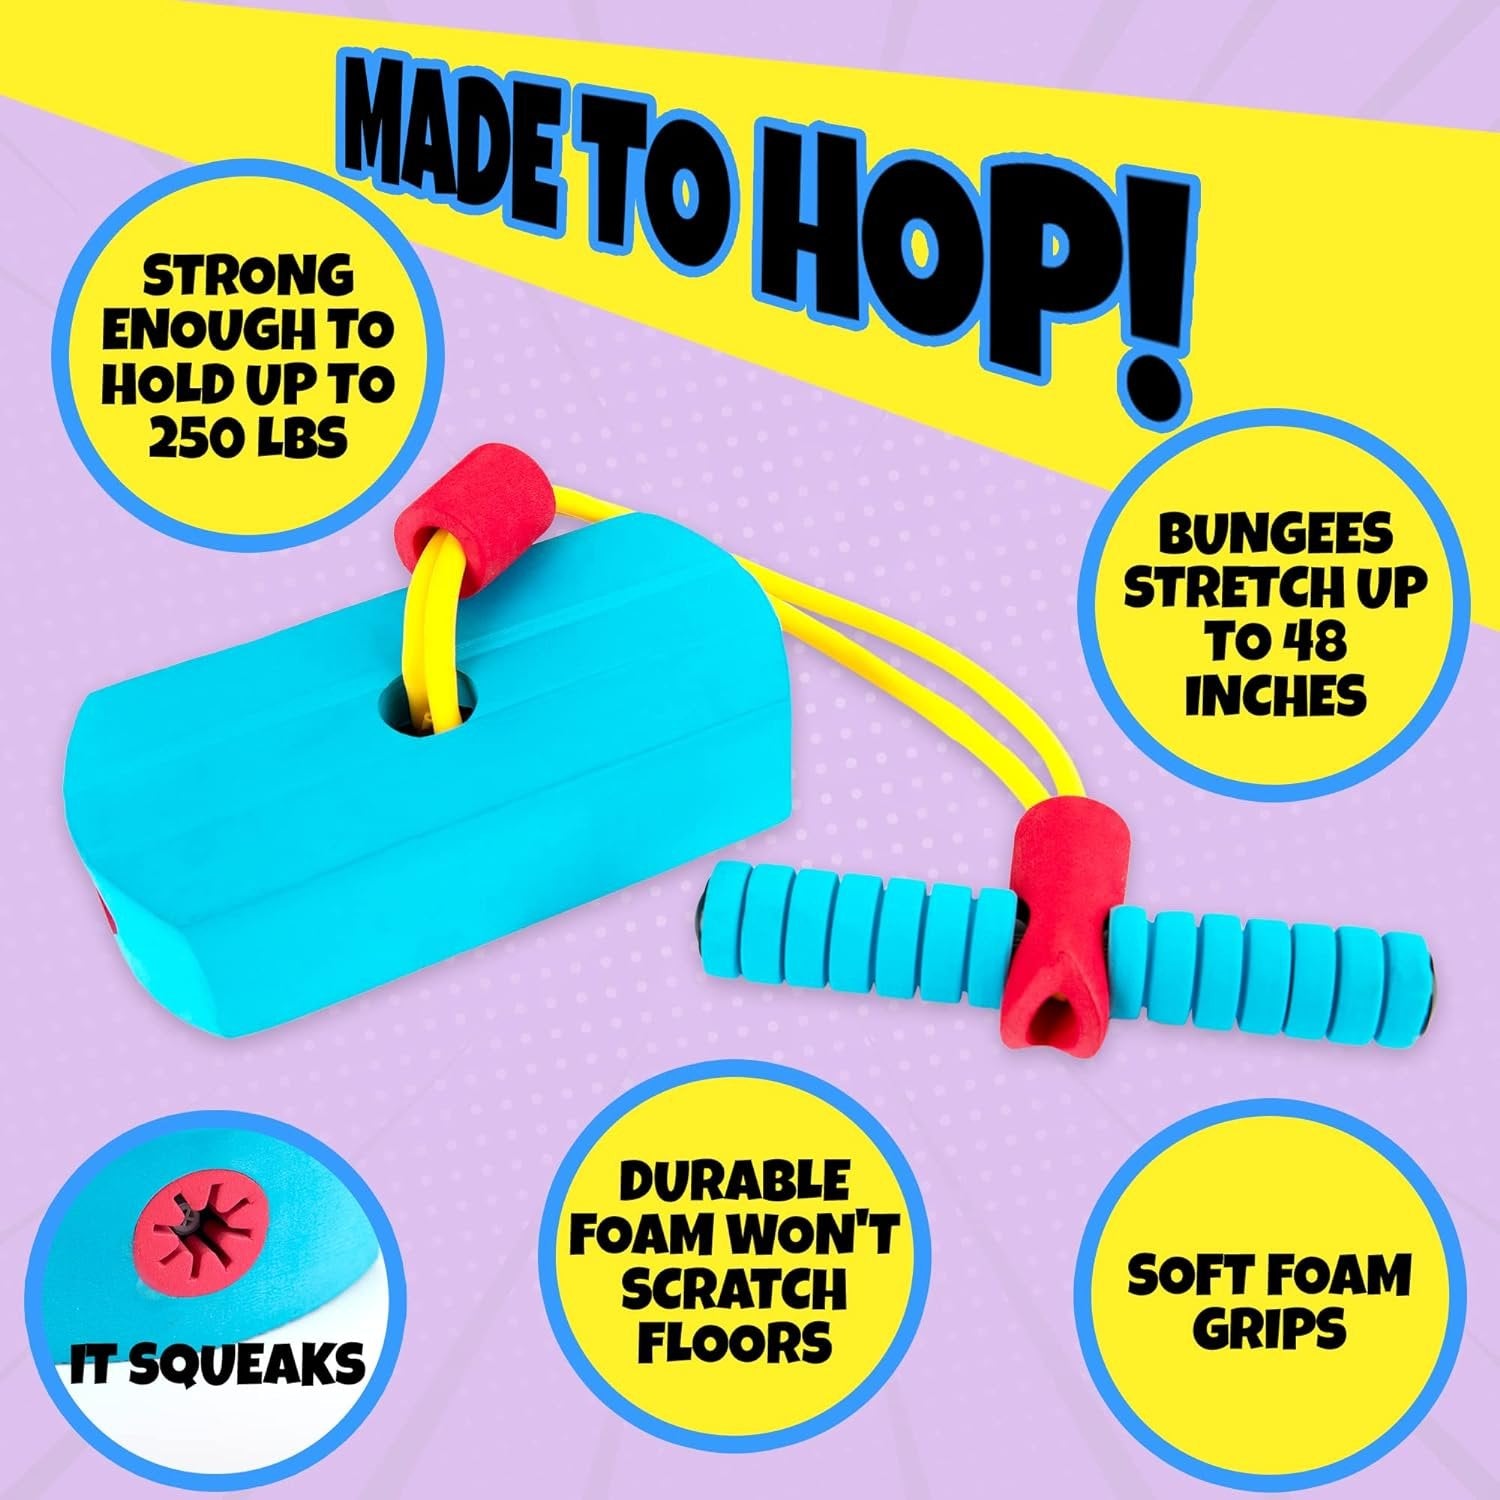 Foam Pogo Jumper for Kids - Pogo Stick with Safe Foam Design - Kids’ Workout Equipment - Hopper Stick for Active Play Indoors and Outdoors - Gift for Boys and Girls 3 and Up